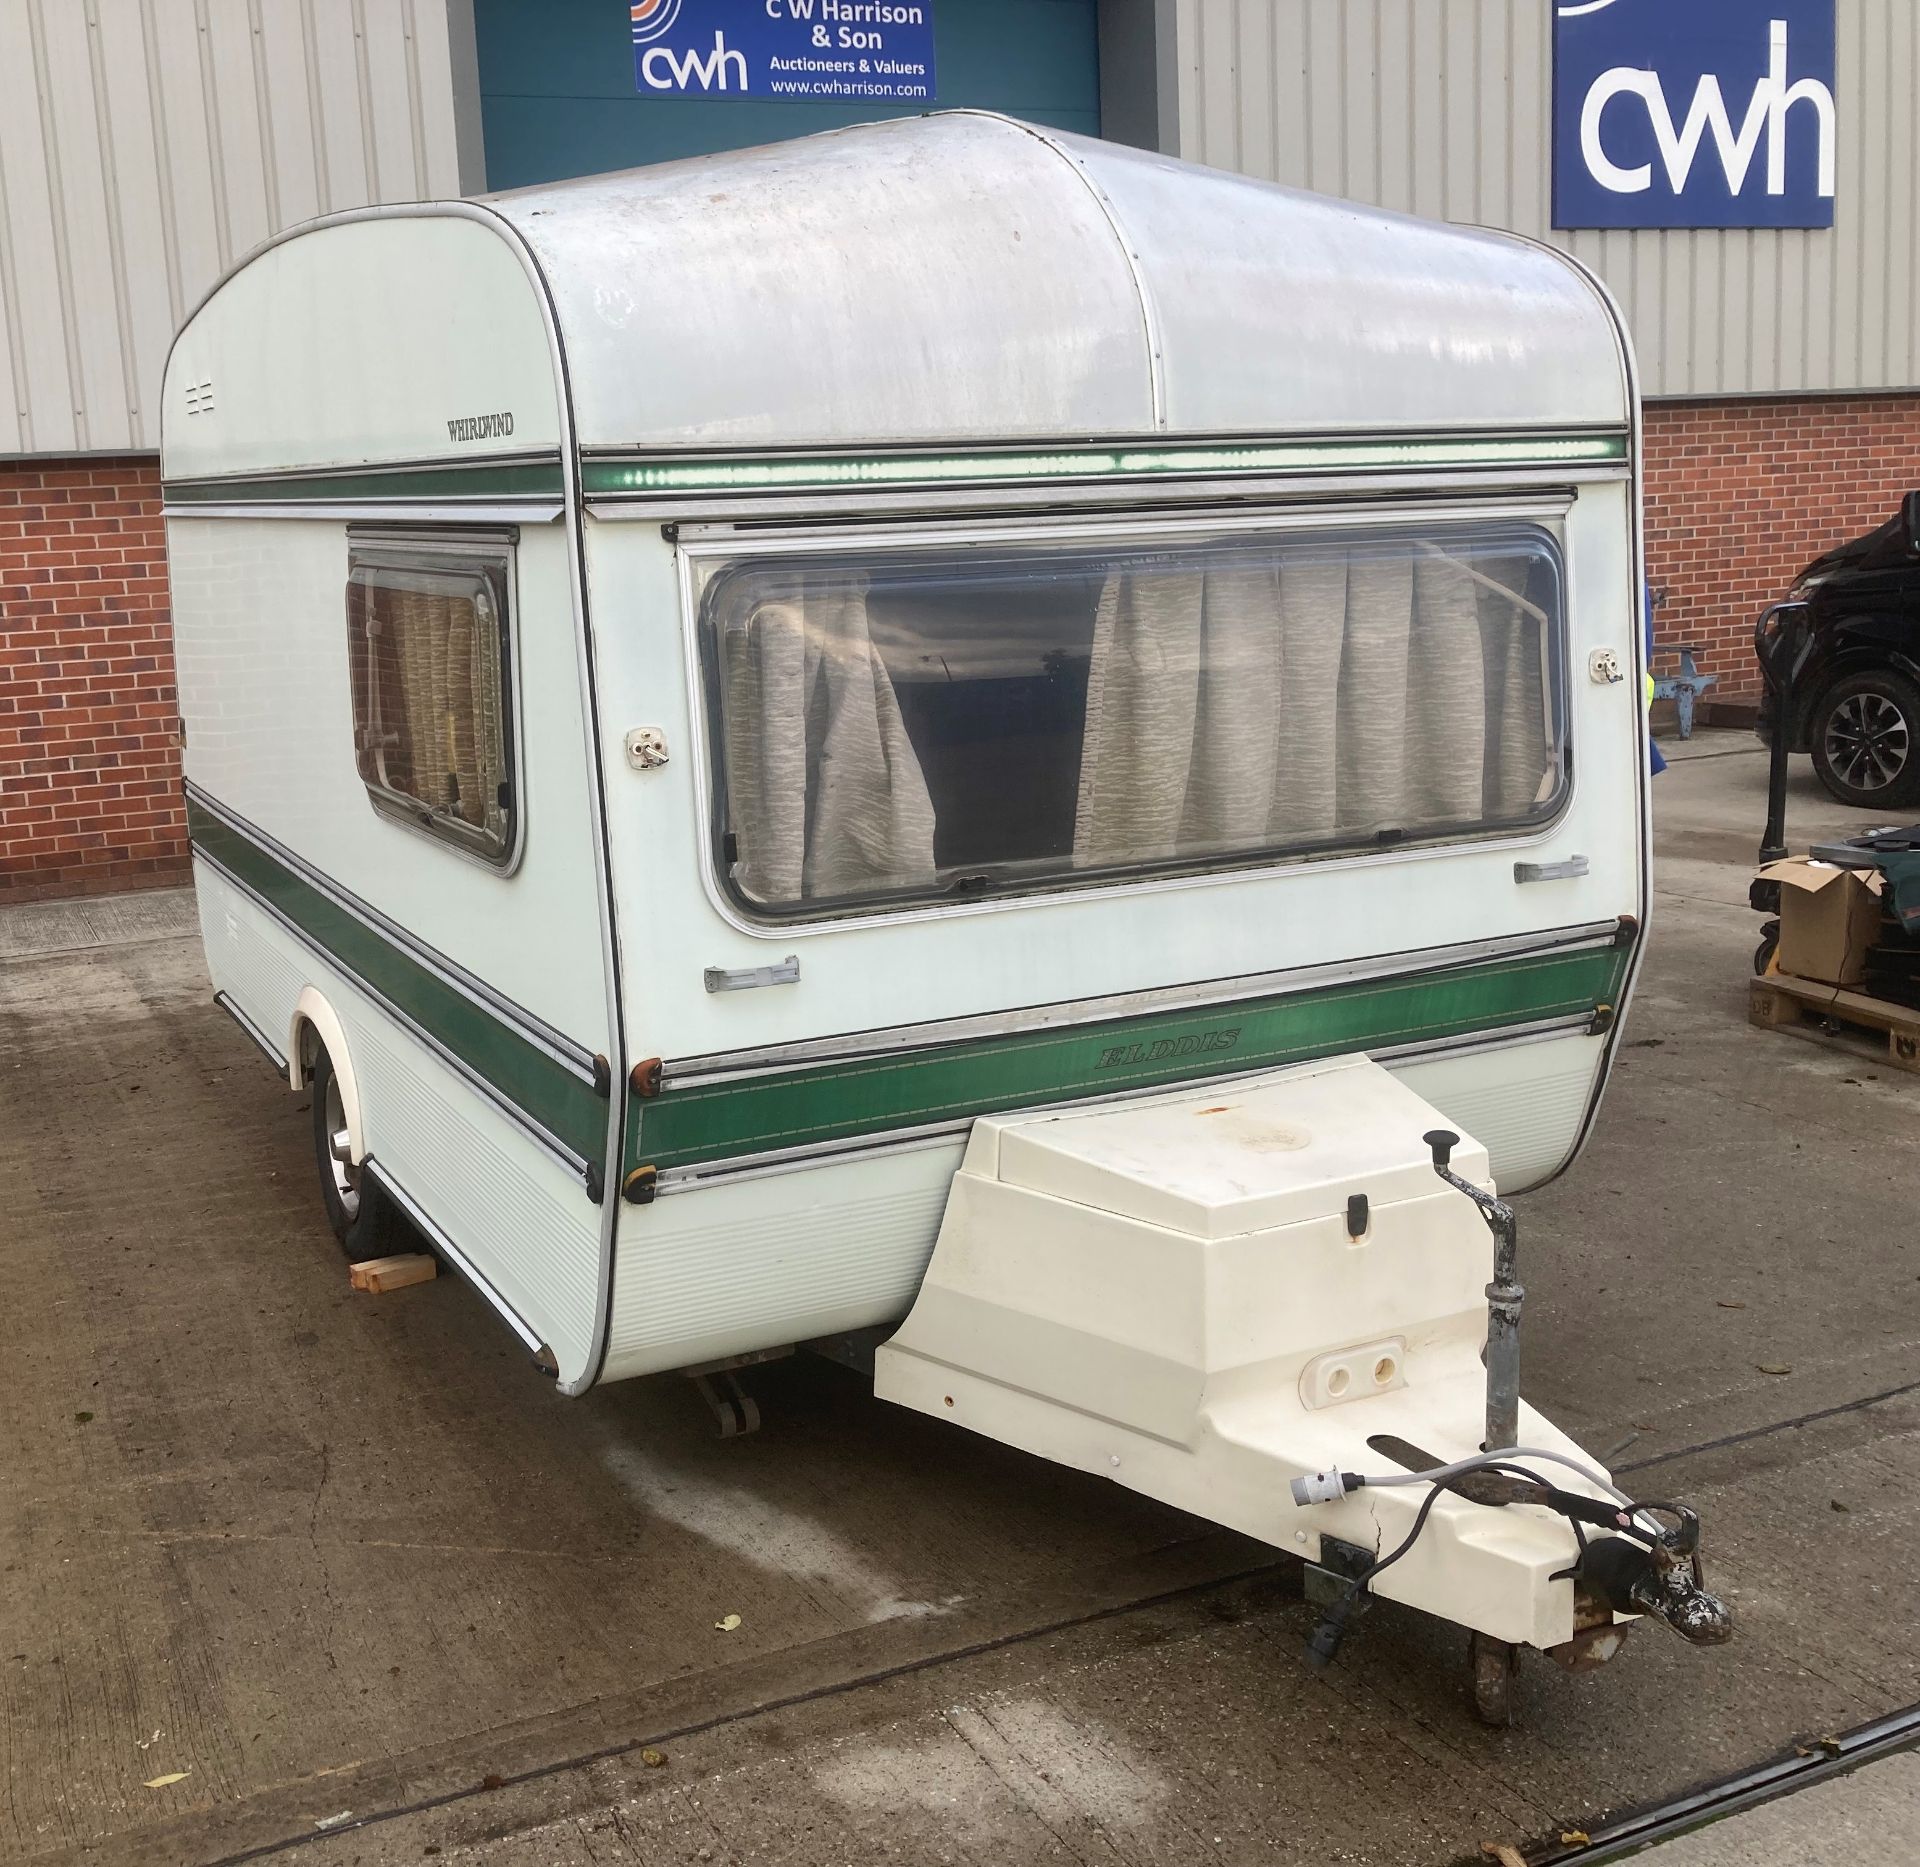 AN ELDDIS WHIRLWIND TWO BERTH TOURING CARAVAN - White with green trim. Serial No: 11344E. - Image 6 of 8